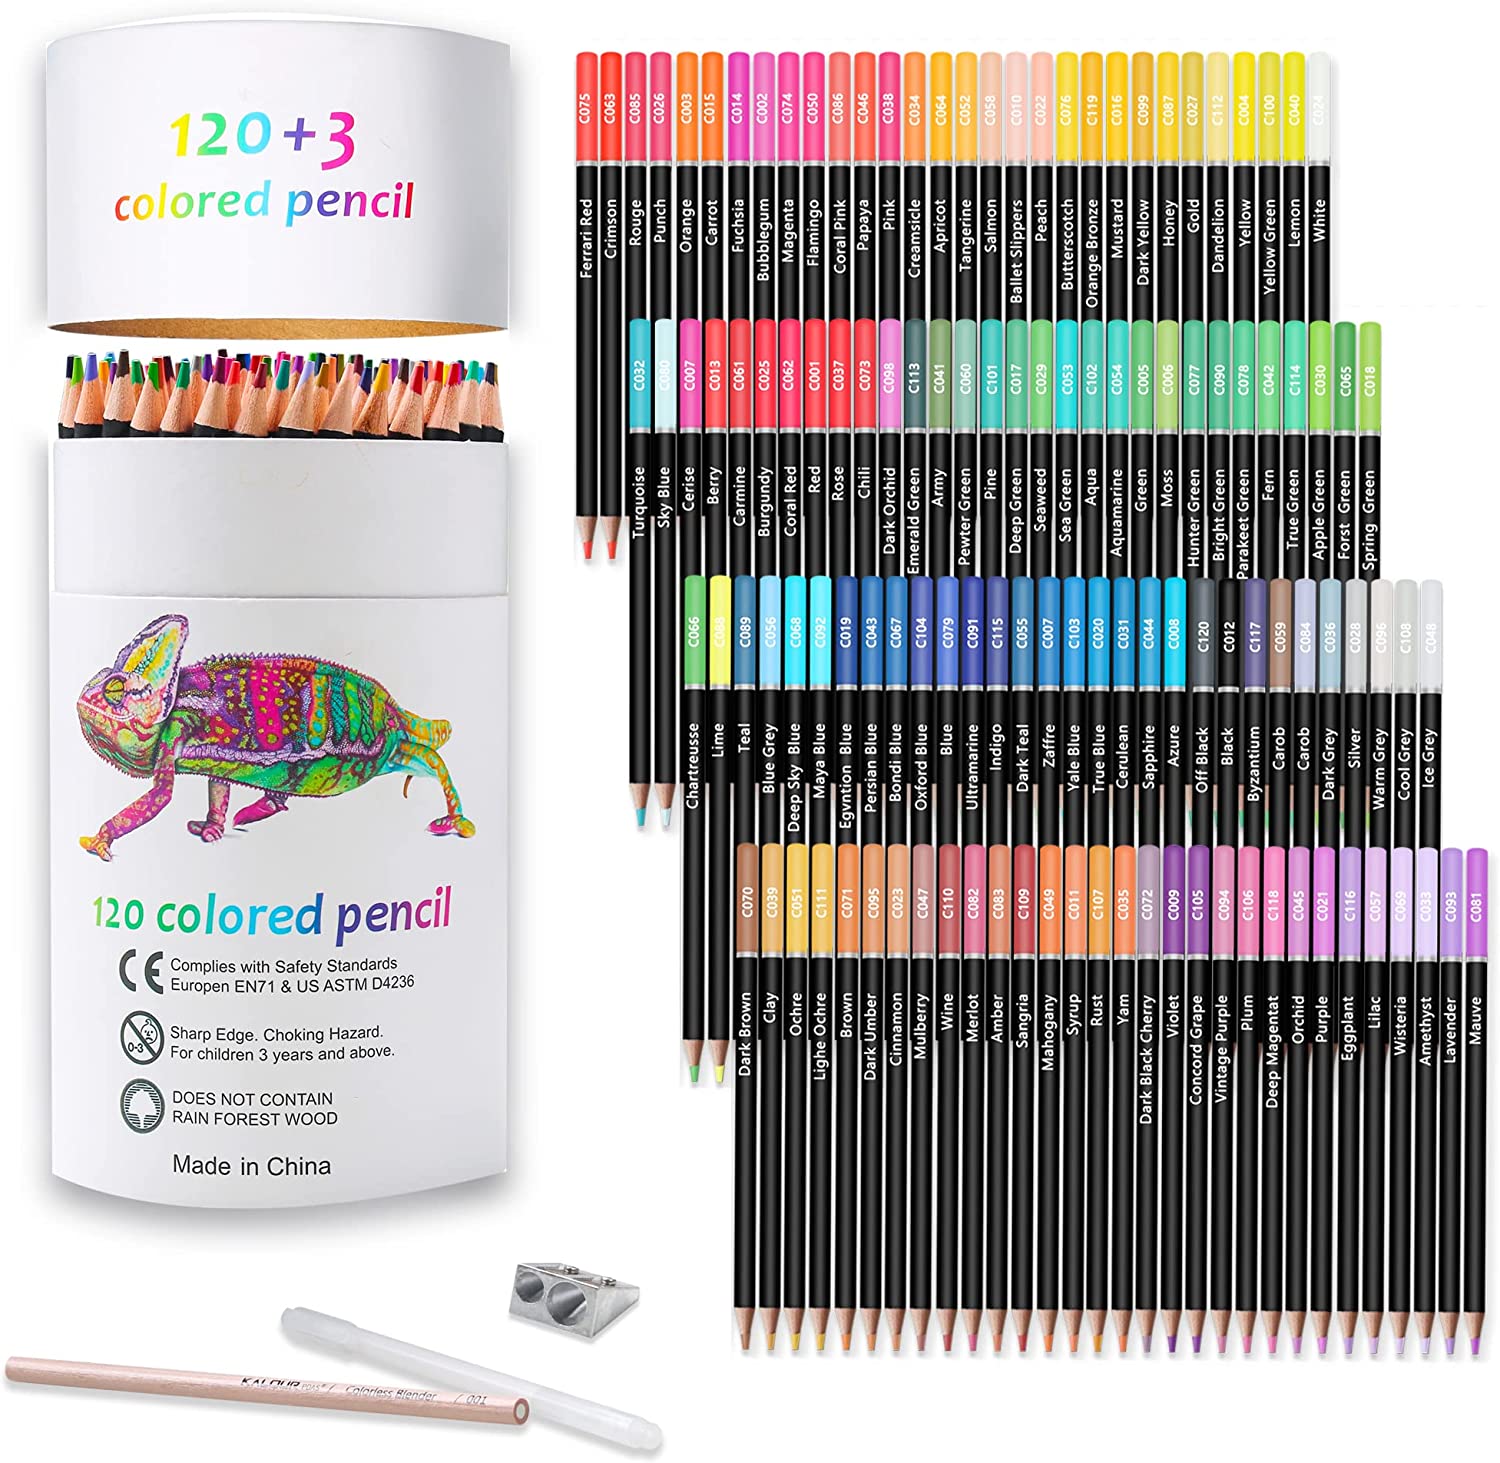 KALOUR Premium Colored Pencils,Set of 120 Colors,Artists Soft Core with Vibrant Color,Ideal for Drawing Sketching Shading,Coloring Pencils for